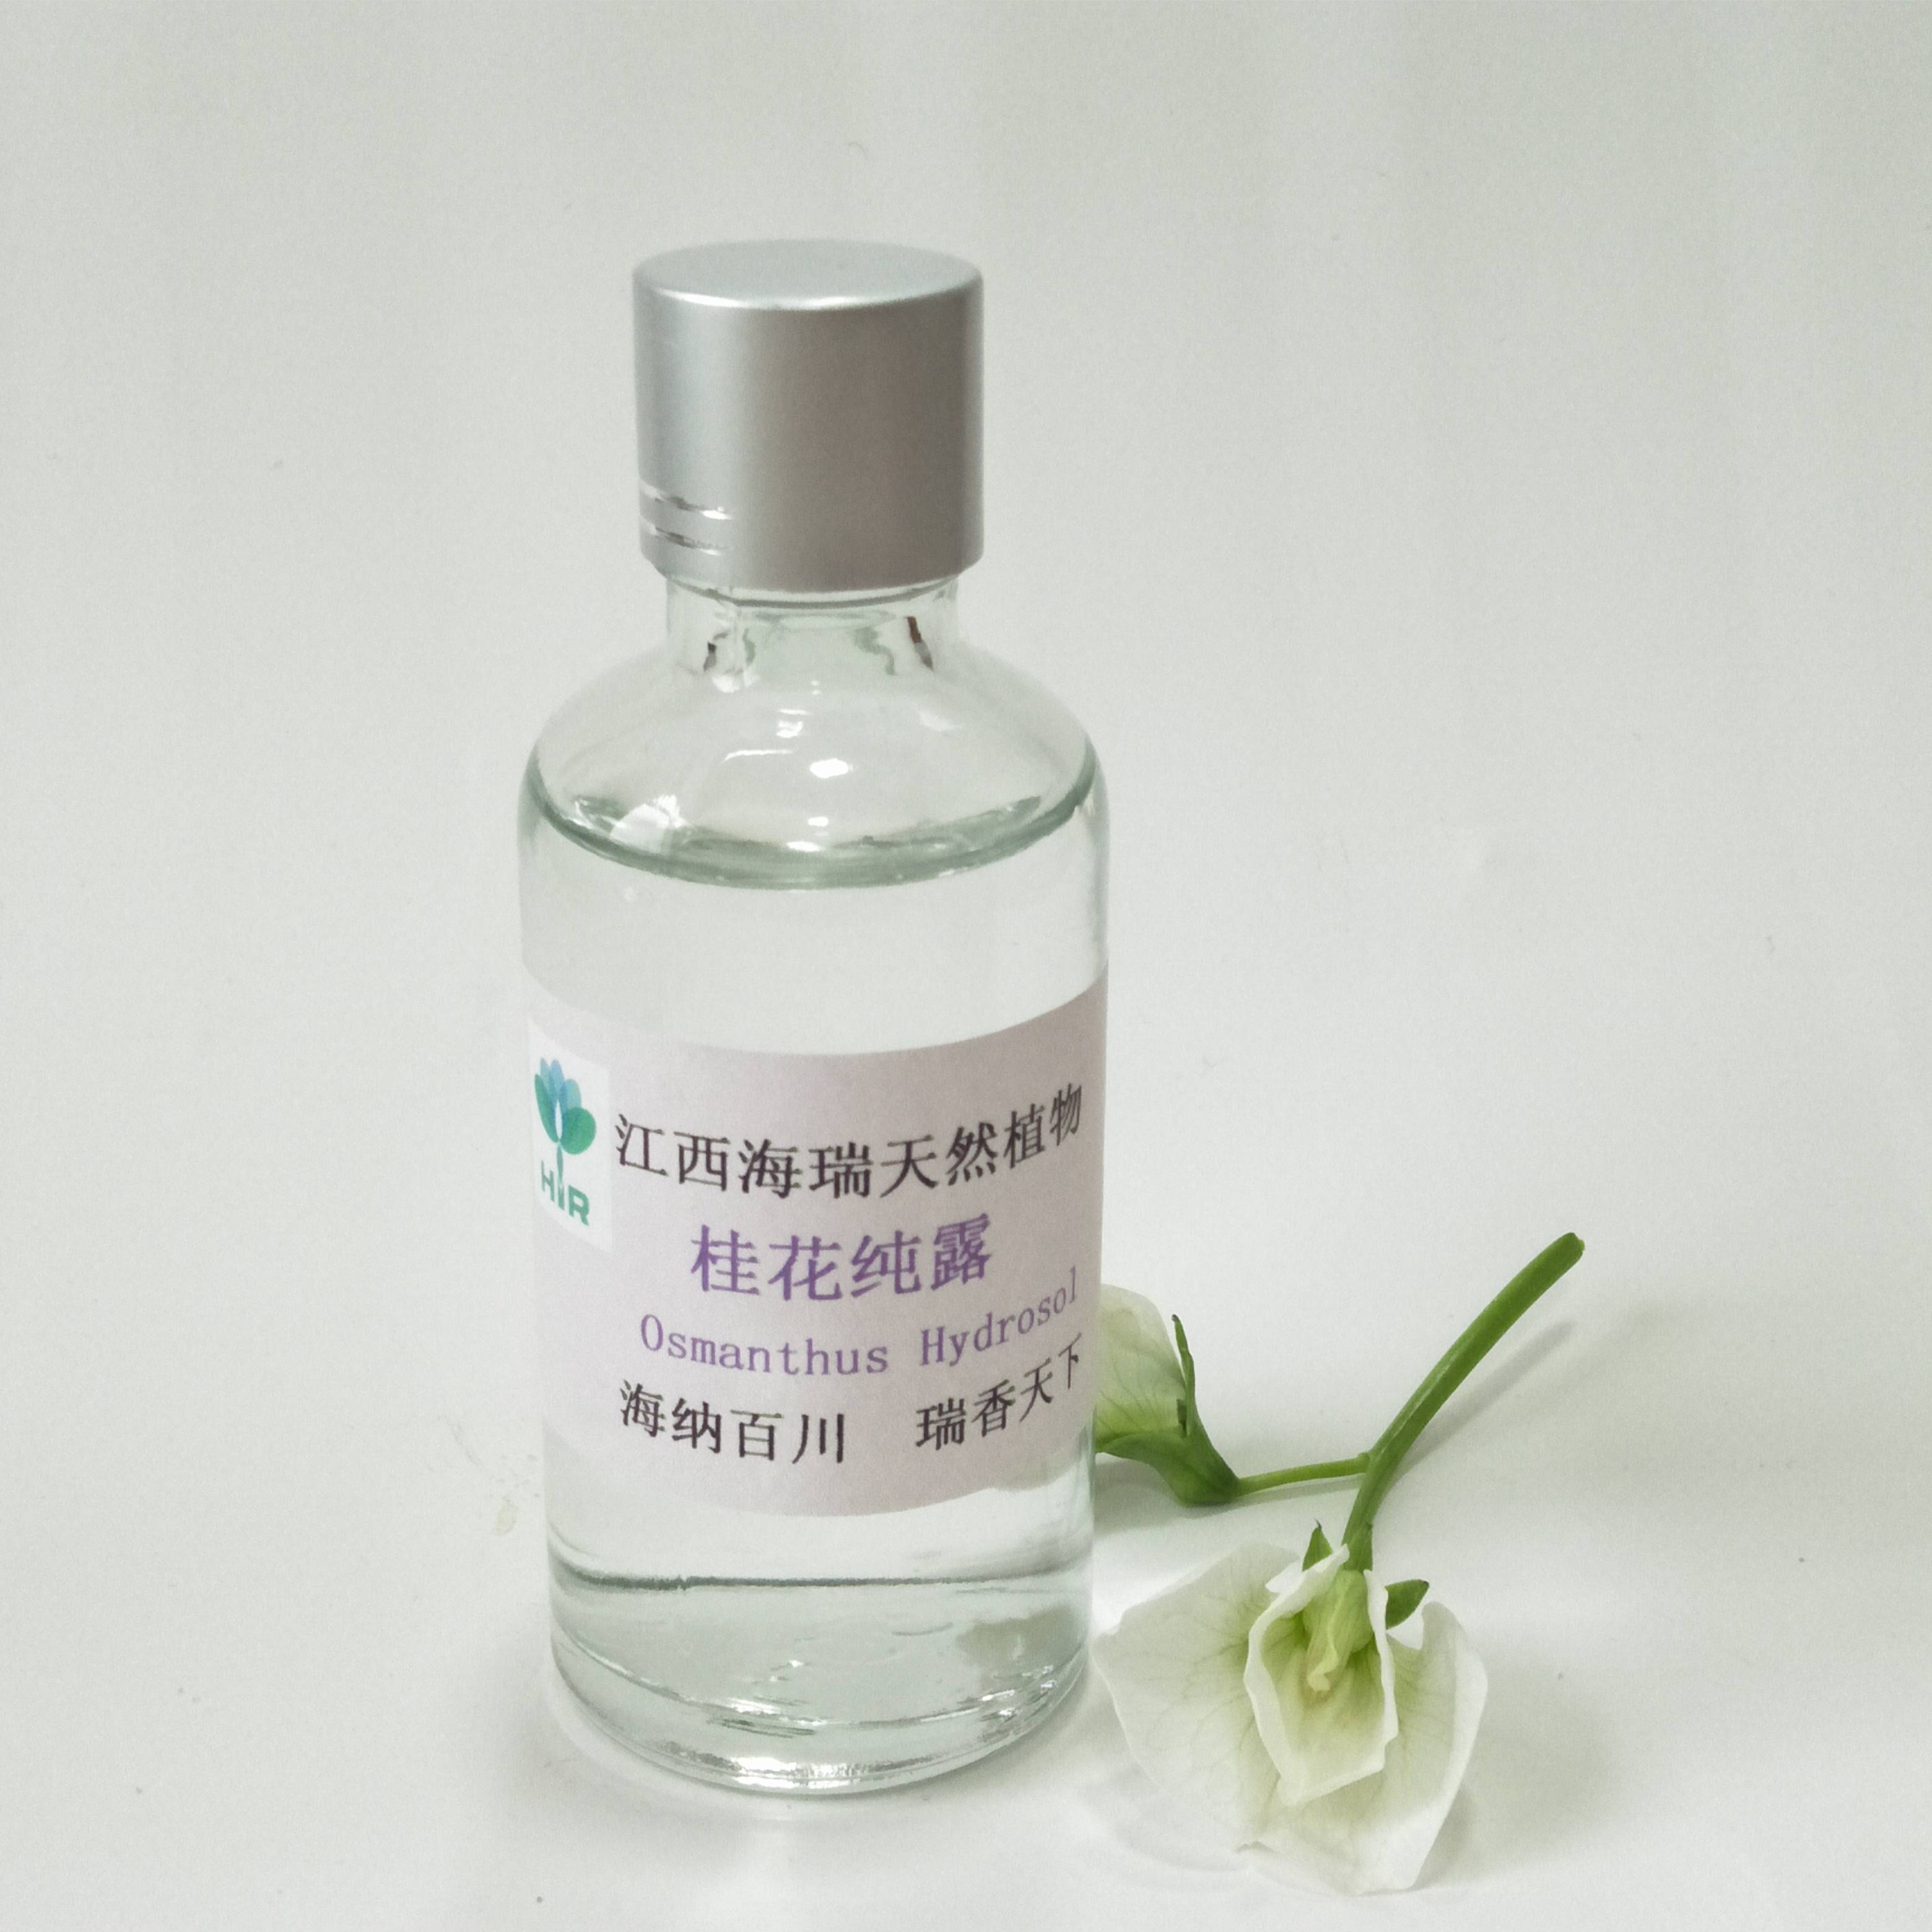 High Performance Rose Oil For Face - Osmanthus hydrosol contain flower smell – HaiRui